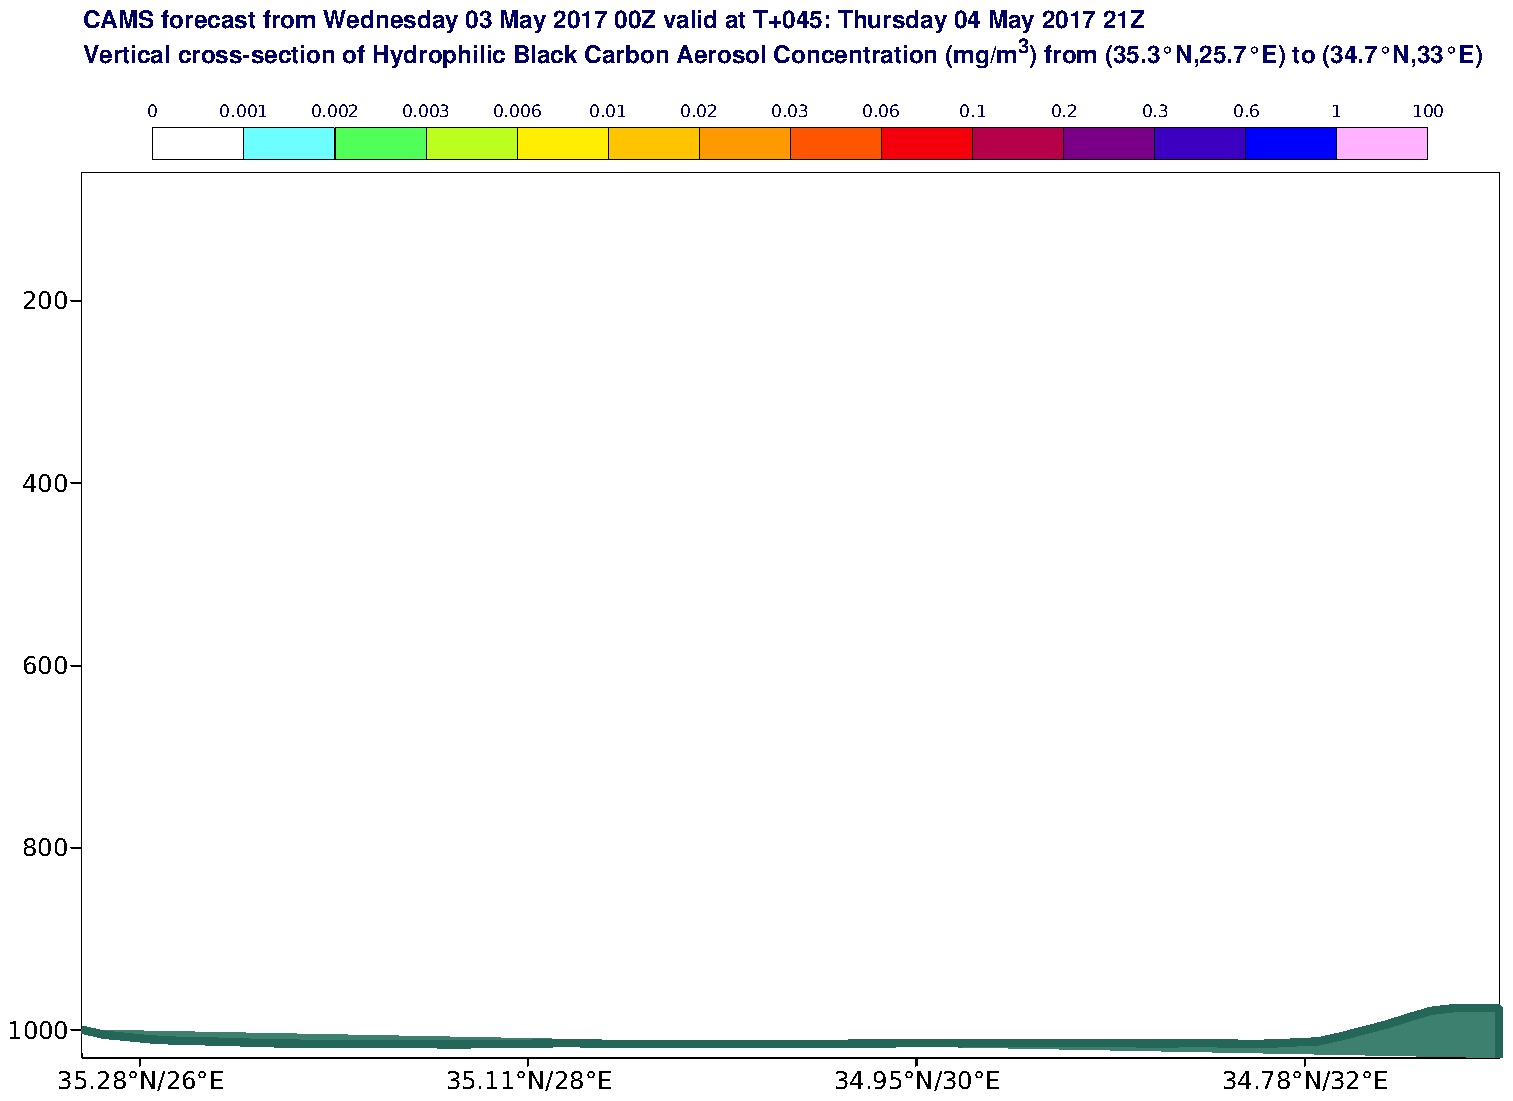 Vertical cross-section of Hydrophilic Black Carbon Aerosol Concentration (mg/m3) valid at T45 - 2017-05-04 21:00